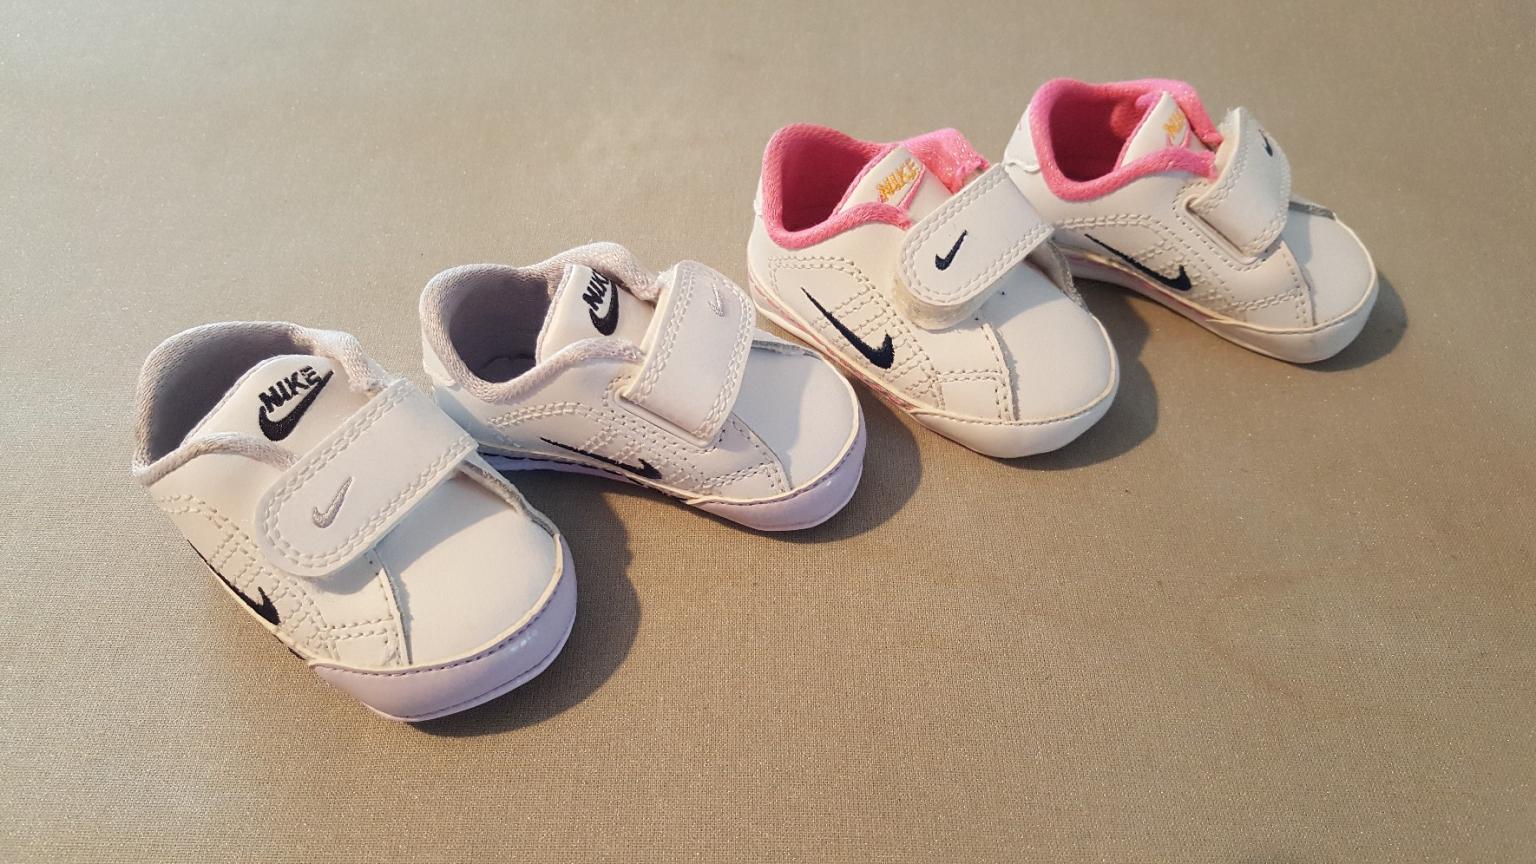 nike baby girl shoes 0 3 months